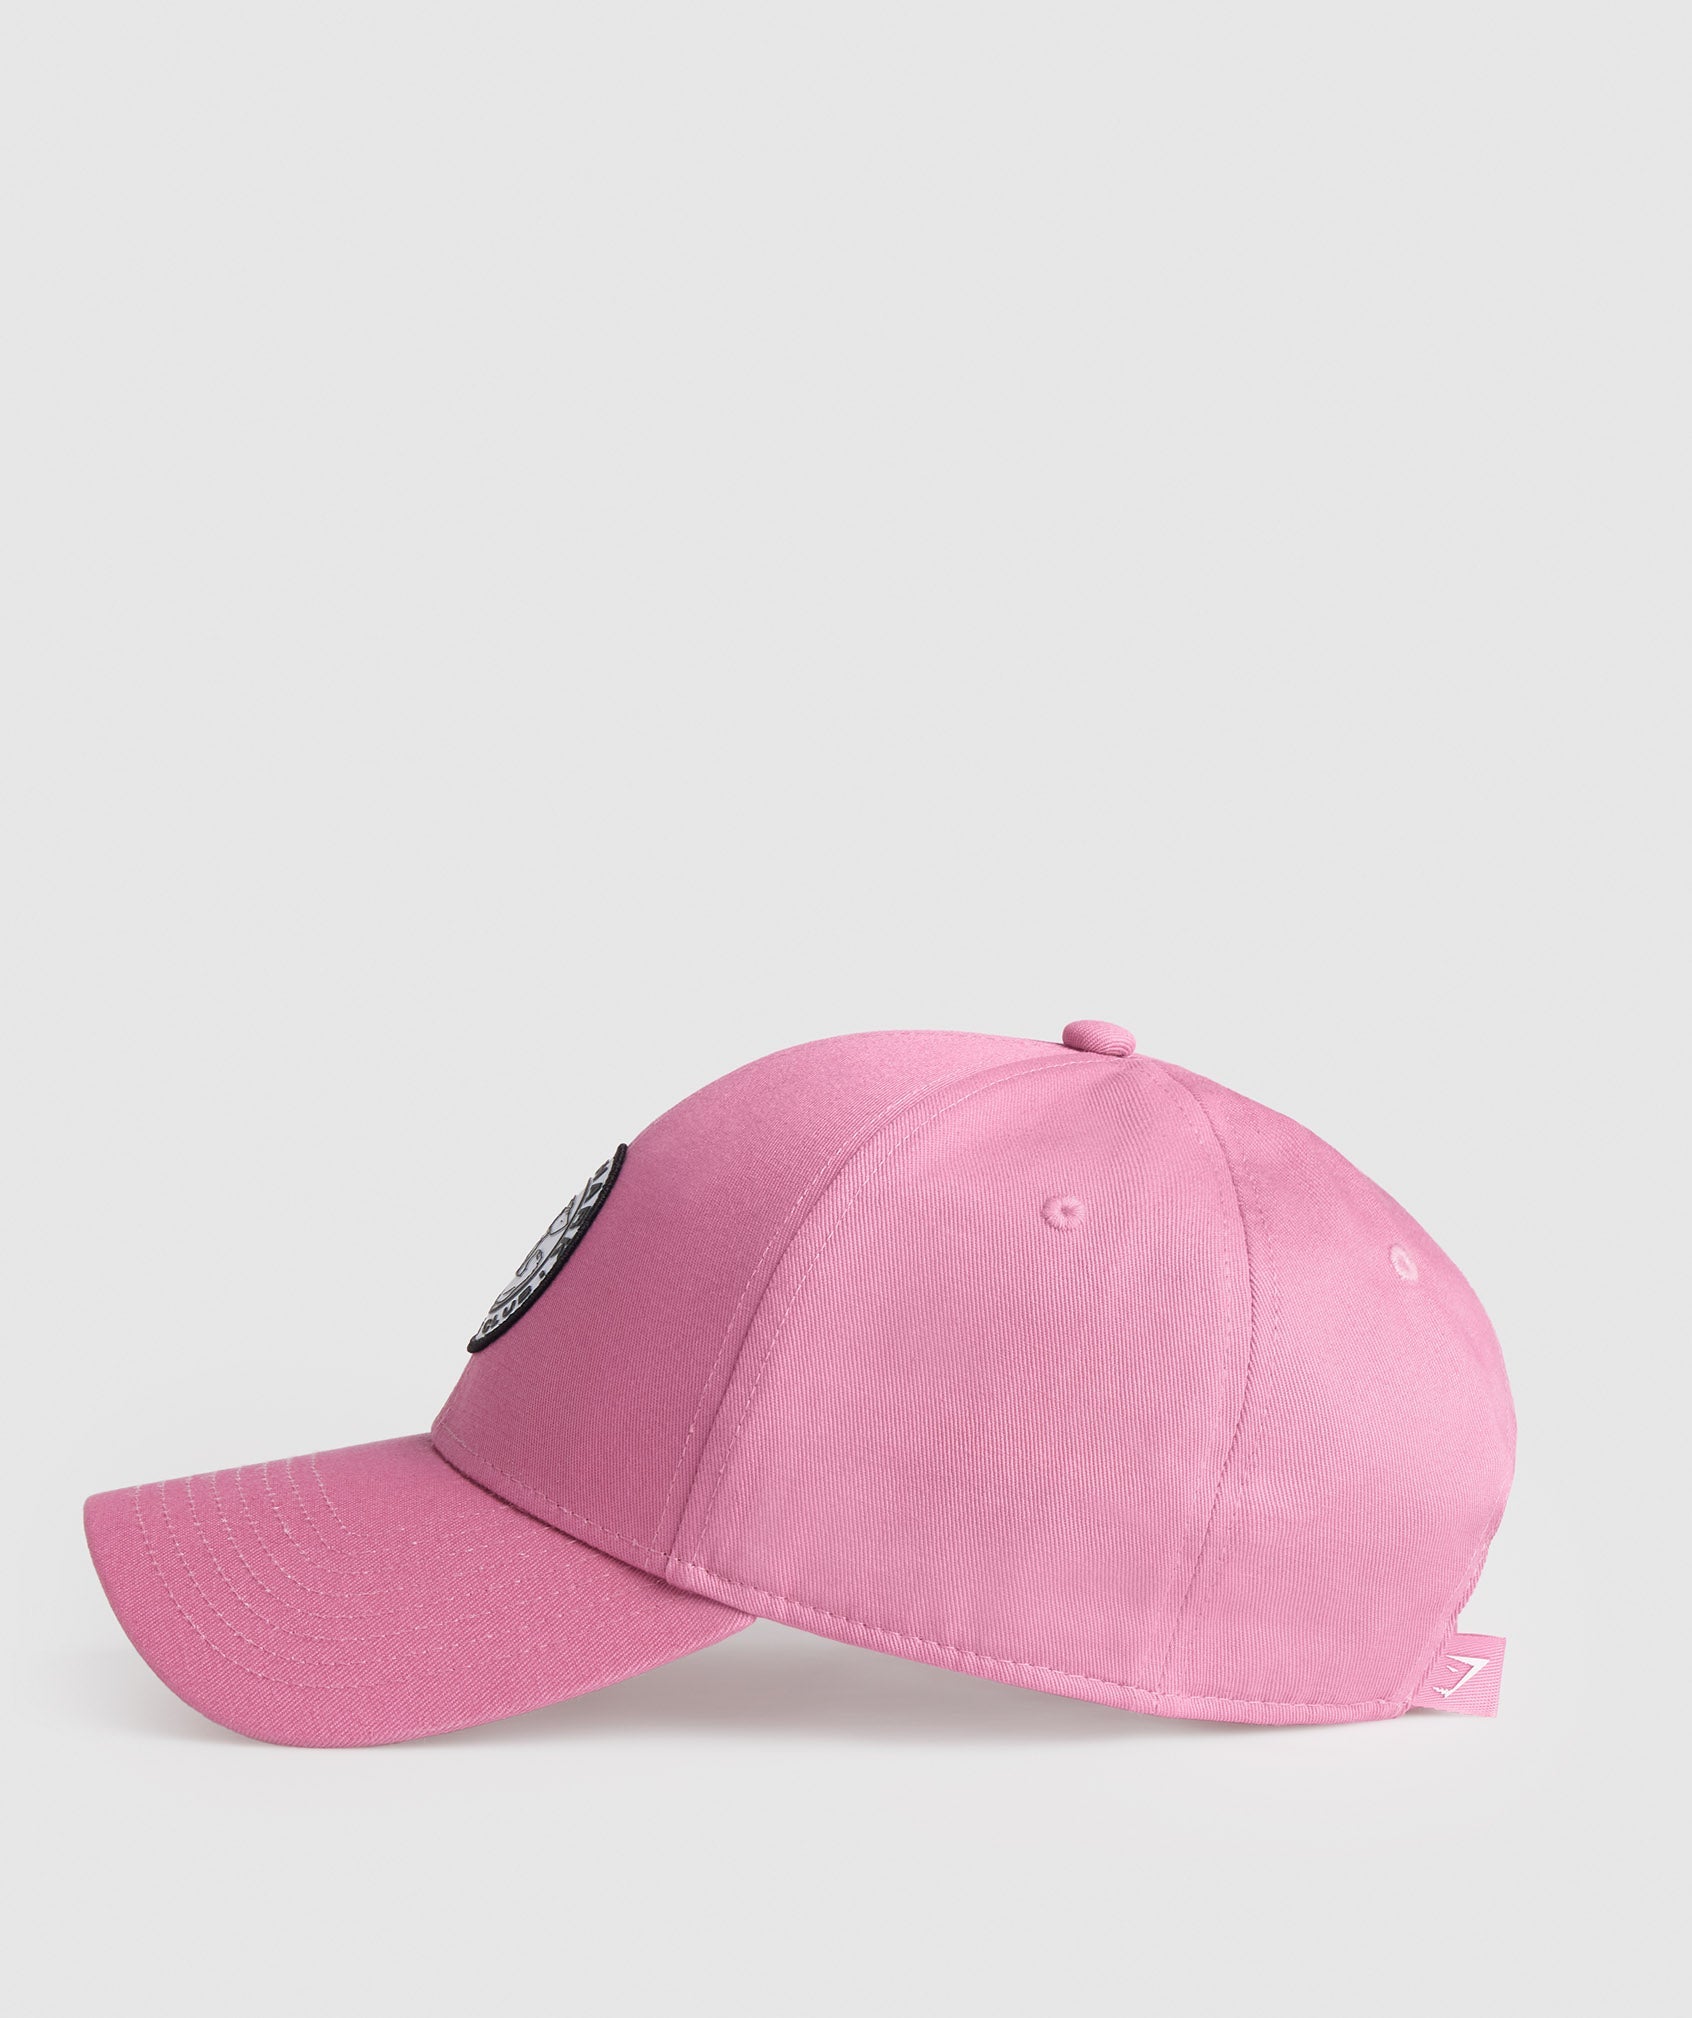 Legacy Cap in Blossom Pink - view 6